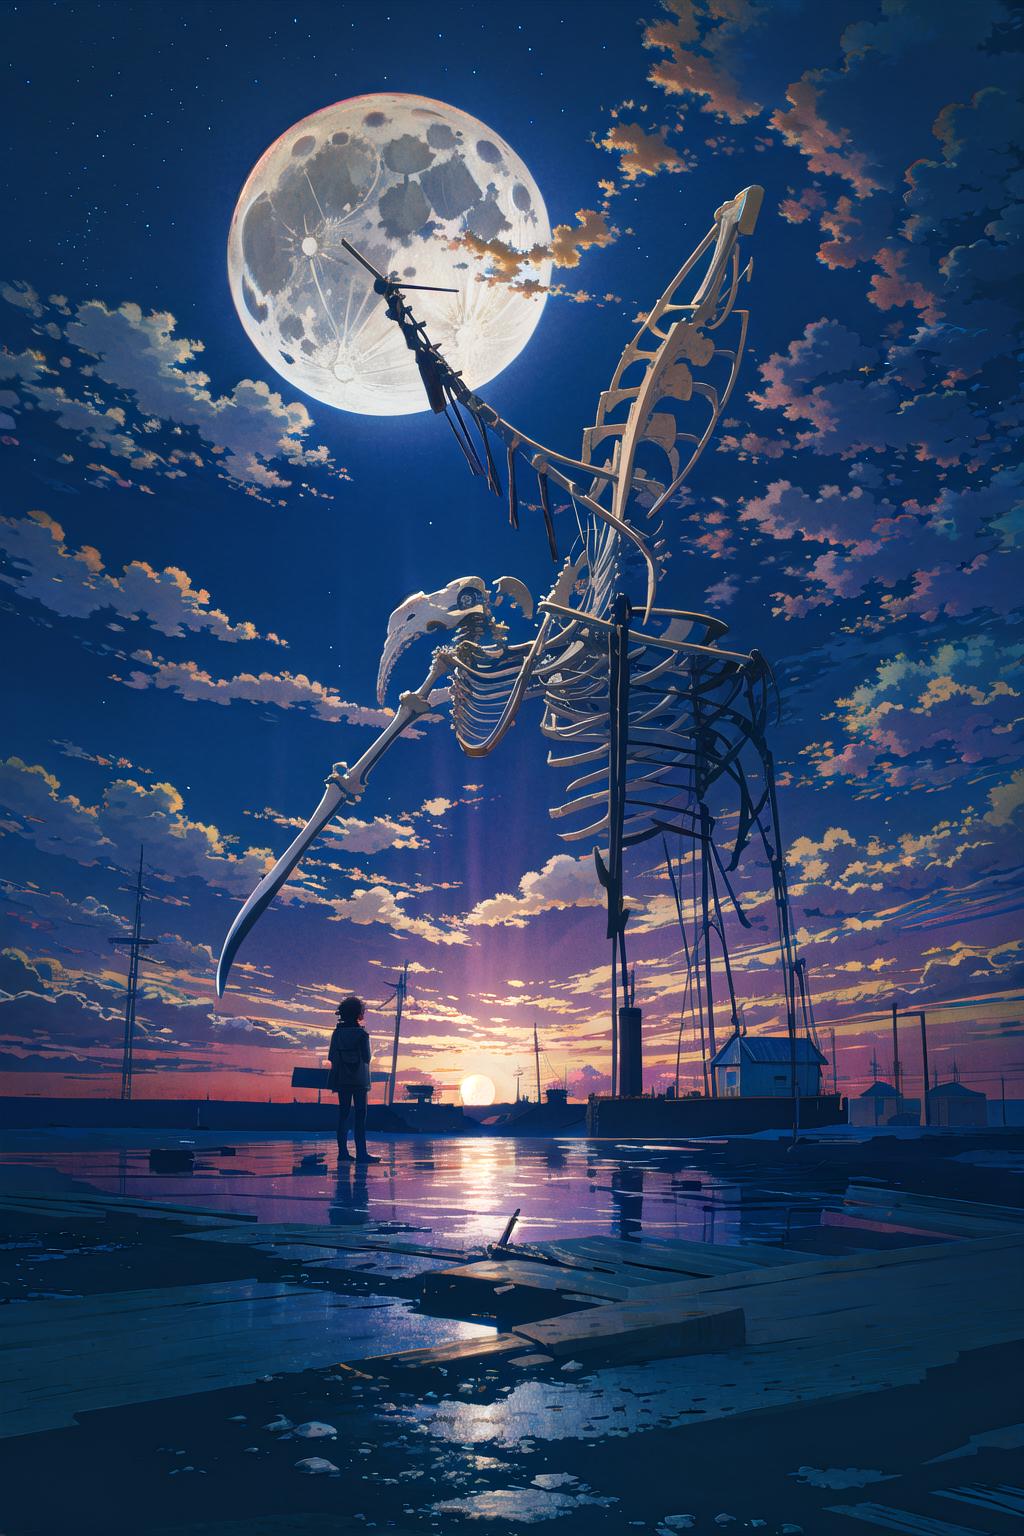 A person standing under a giant skeleton sculpture at sunset.